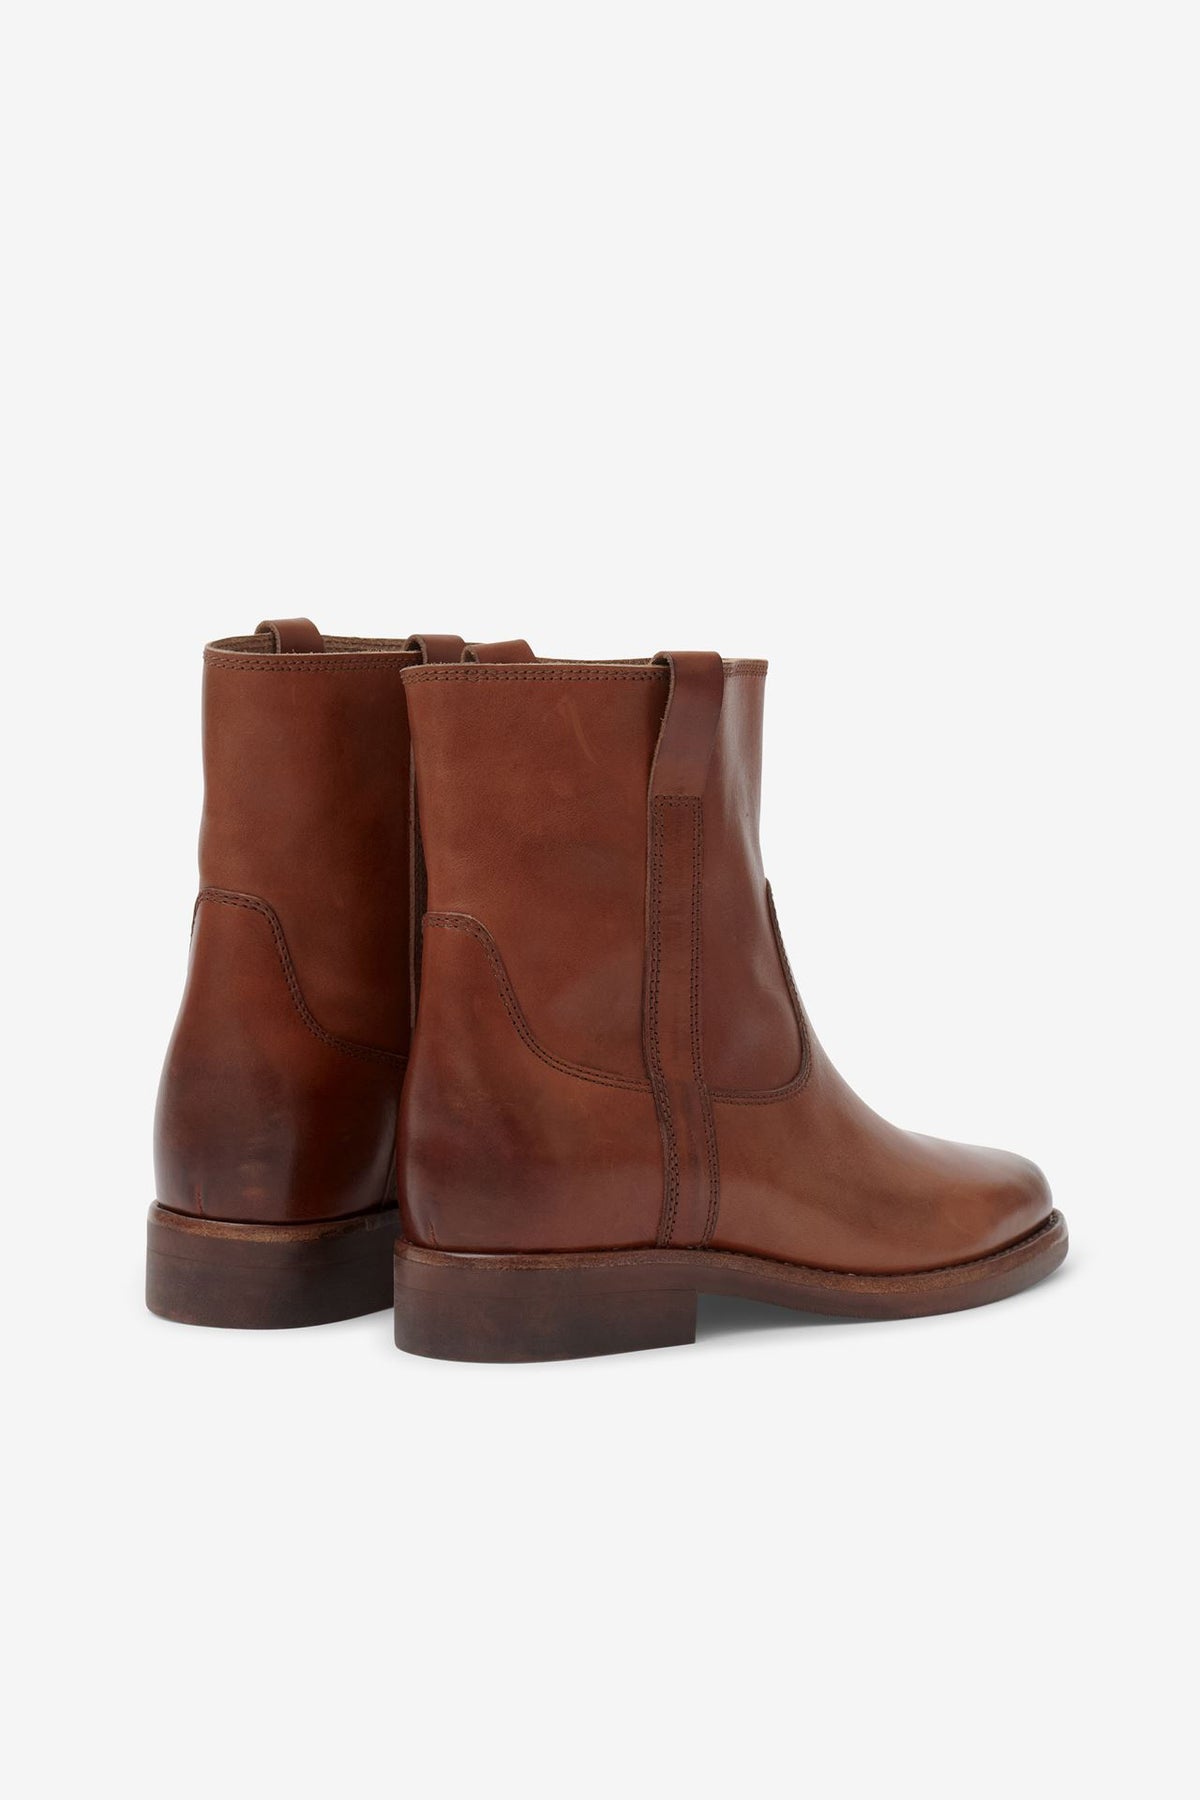 Isabel Marant Susee Ankle Boot